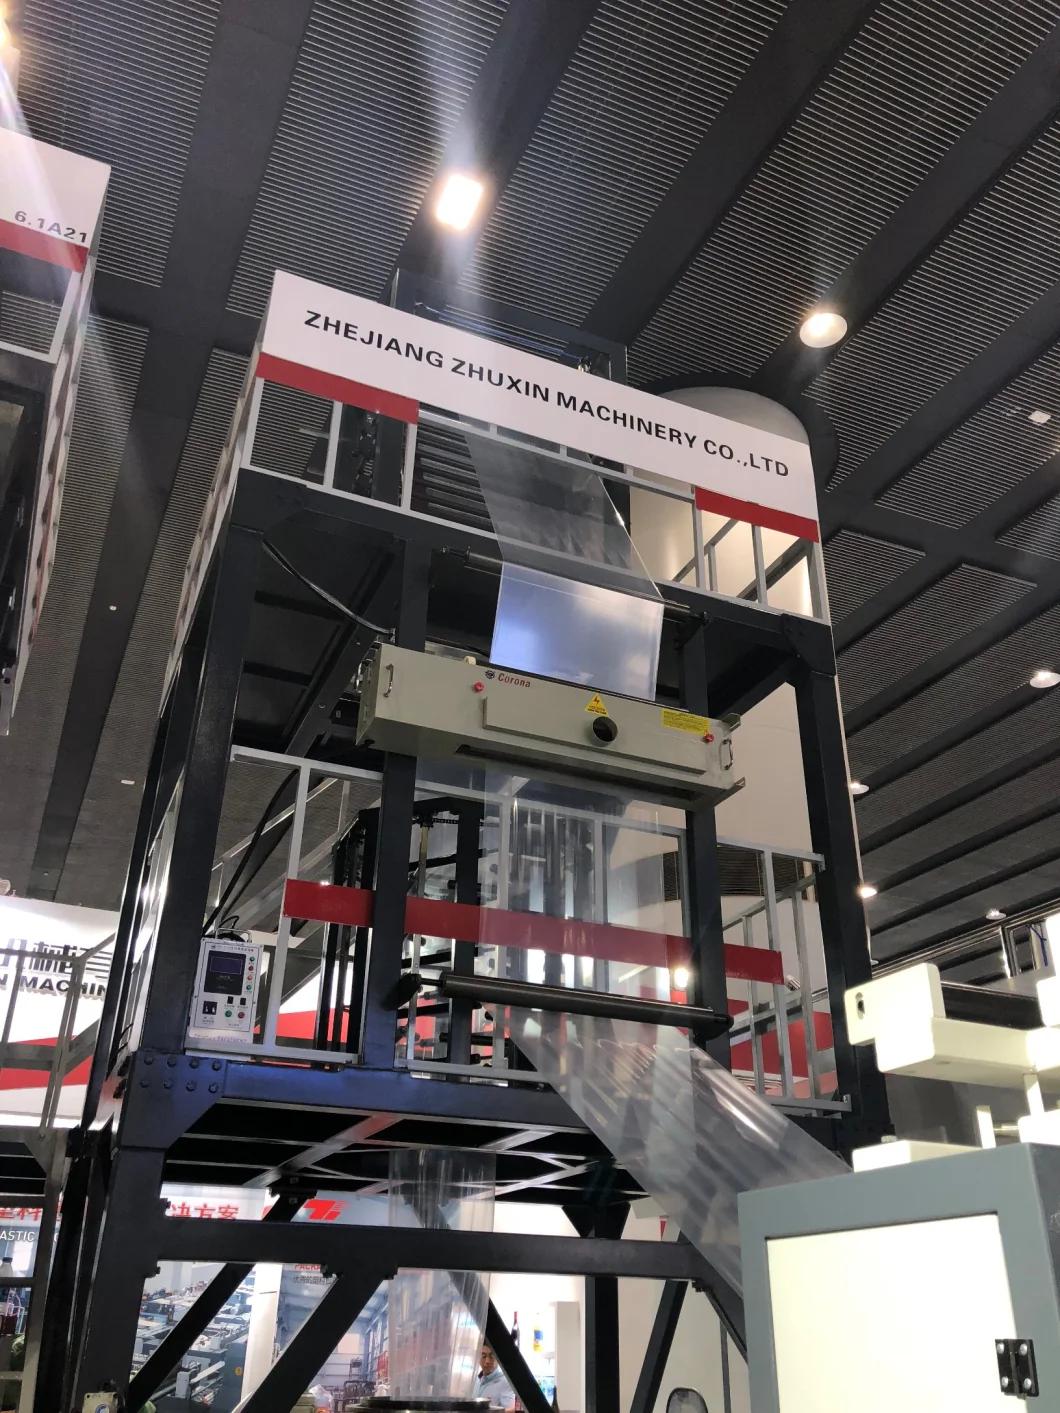 2019 Chinaplas Type Sj-a 55 Film Blowing Machine with Rotary Die Head and Double Winder